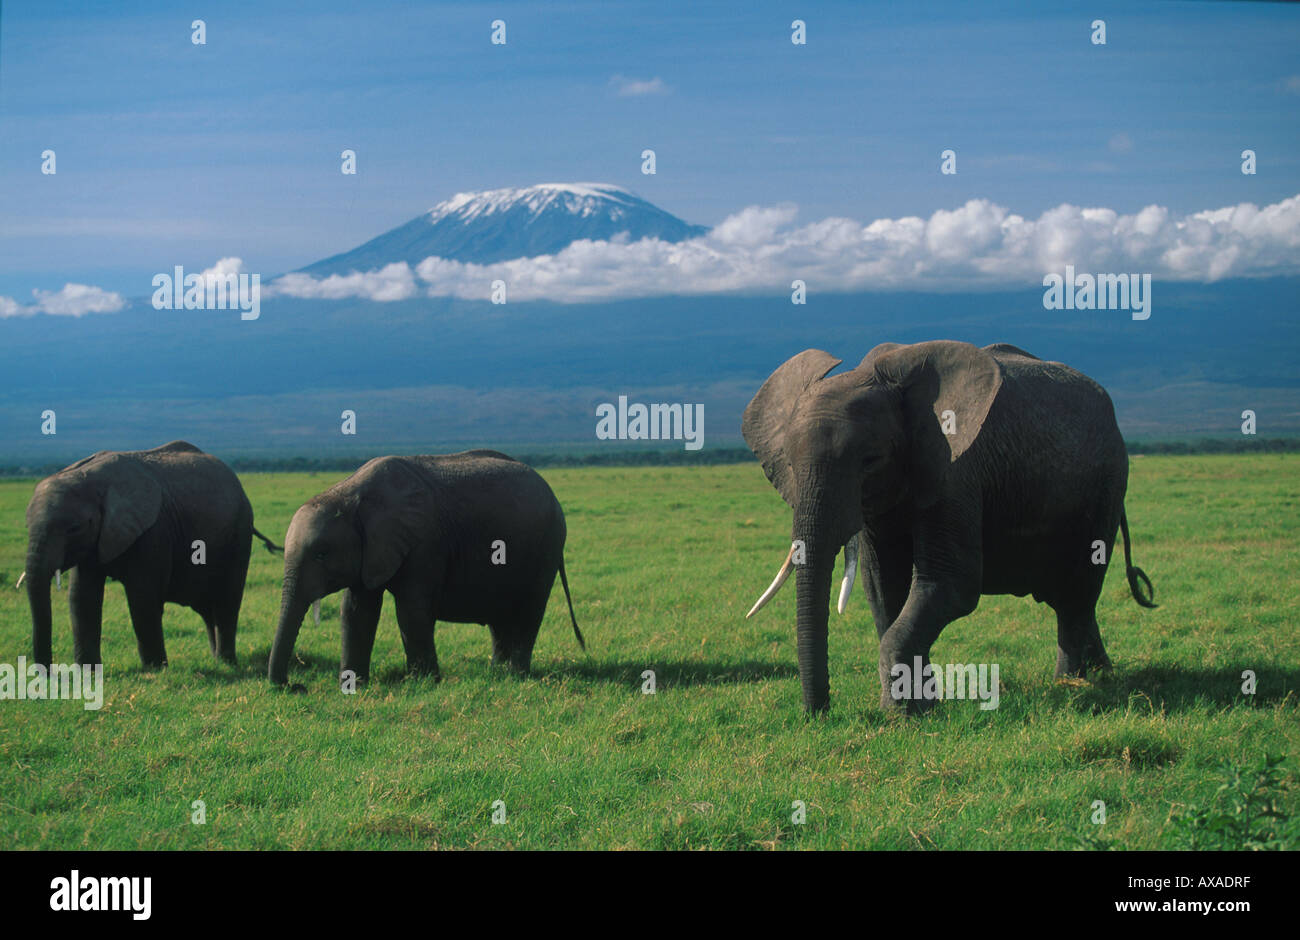 African elephants on a African plain, Kilimanjaro in the background, Tanzania, Africa Stock Photo